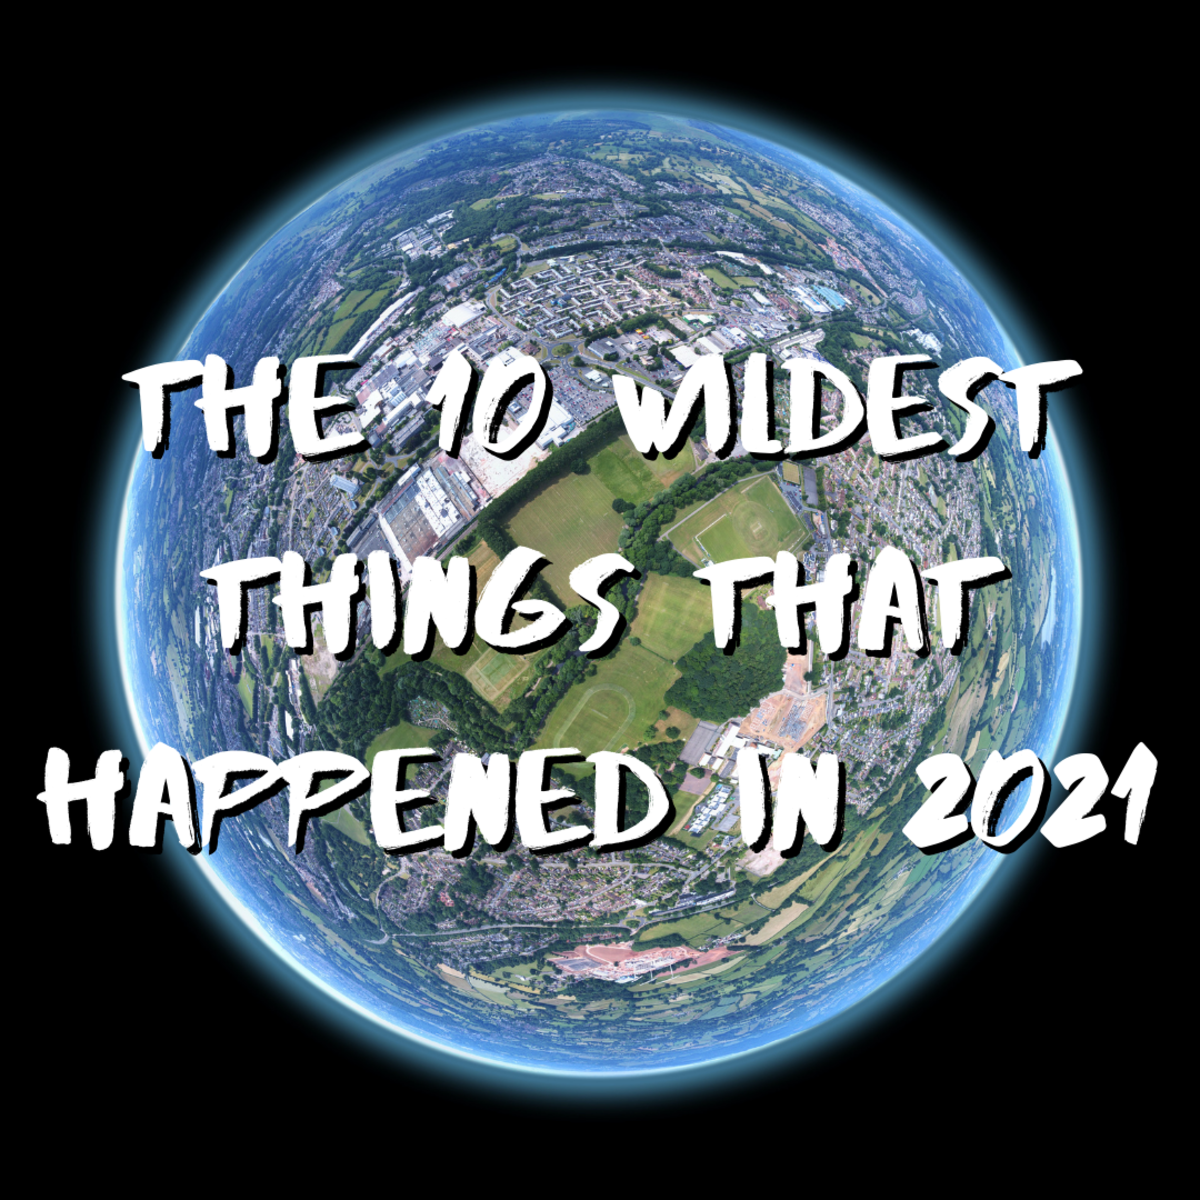 10 wild and crazy things that happened in 2021